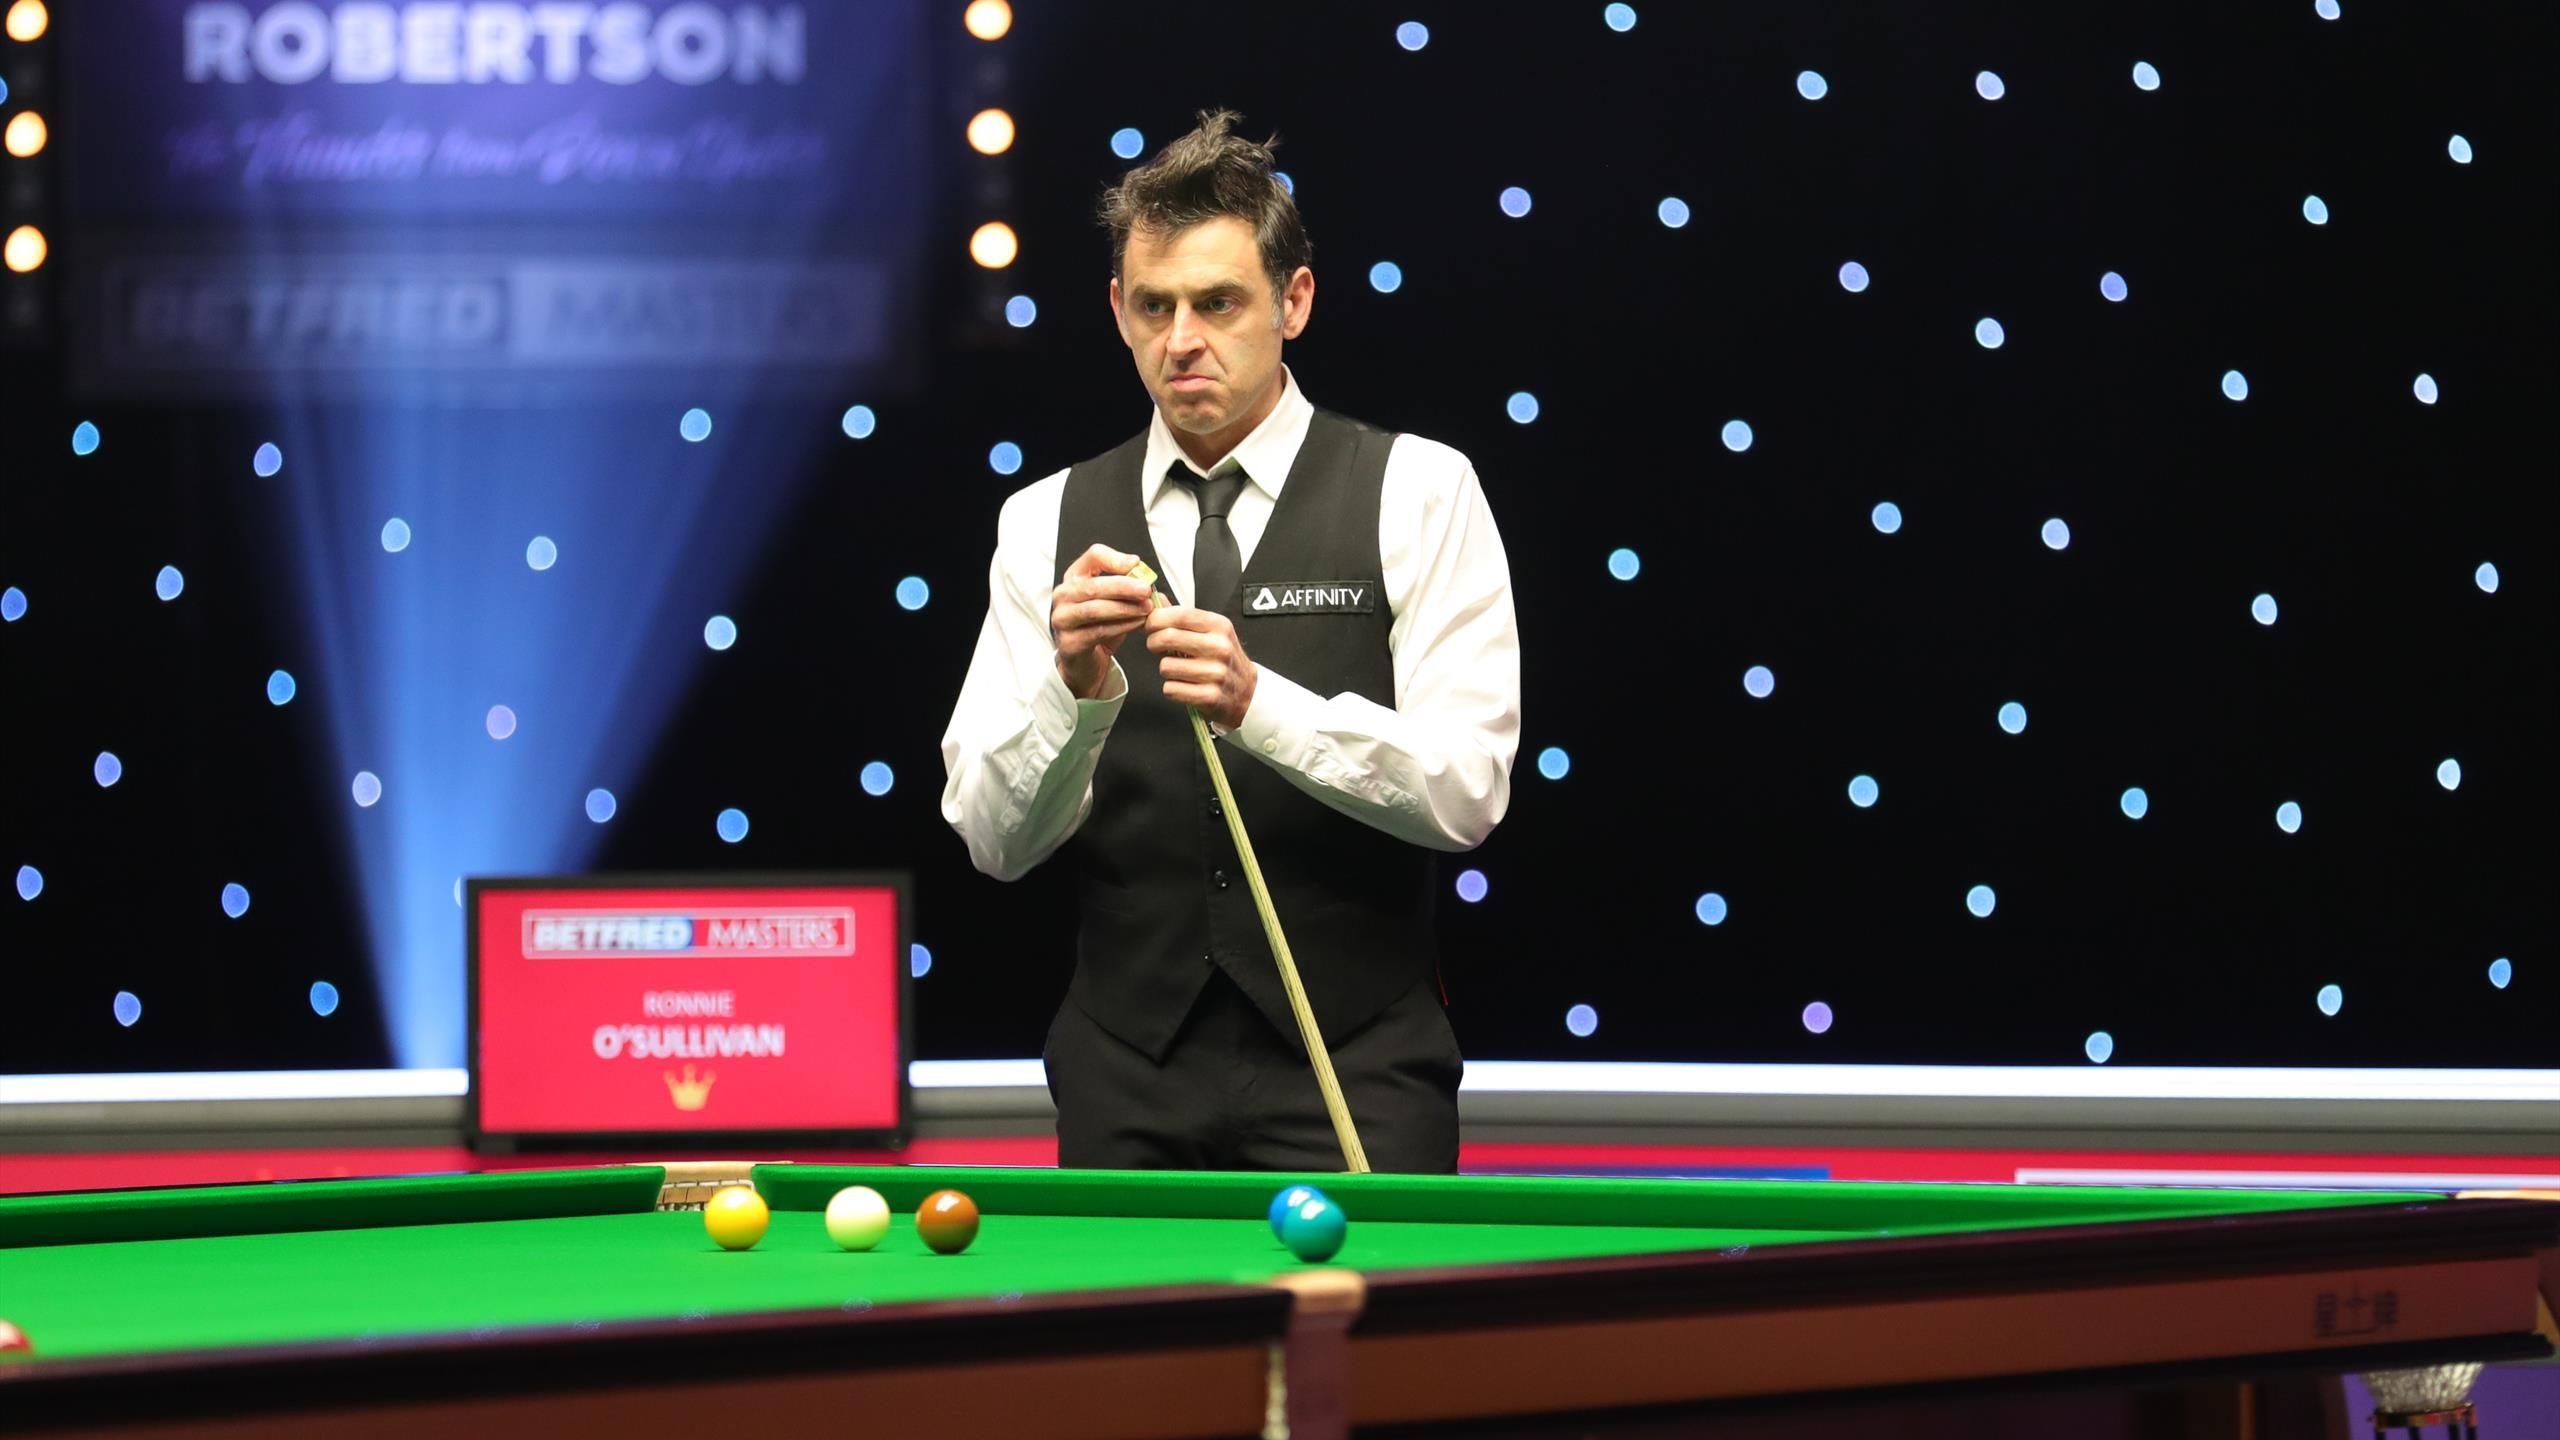 Masters 2022 - Latest results, scores, schedule and order of play with Ronnie OSullivan and Judd Trump in action